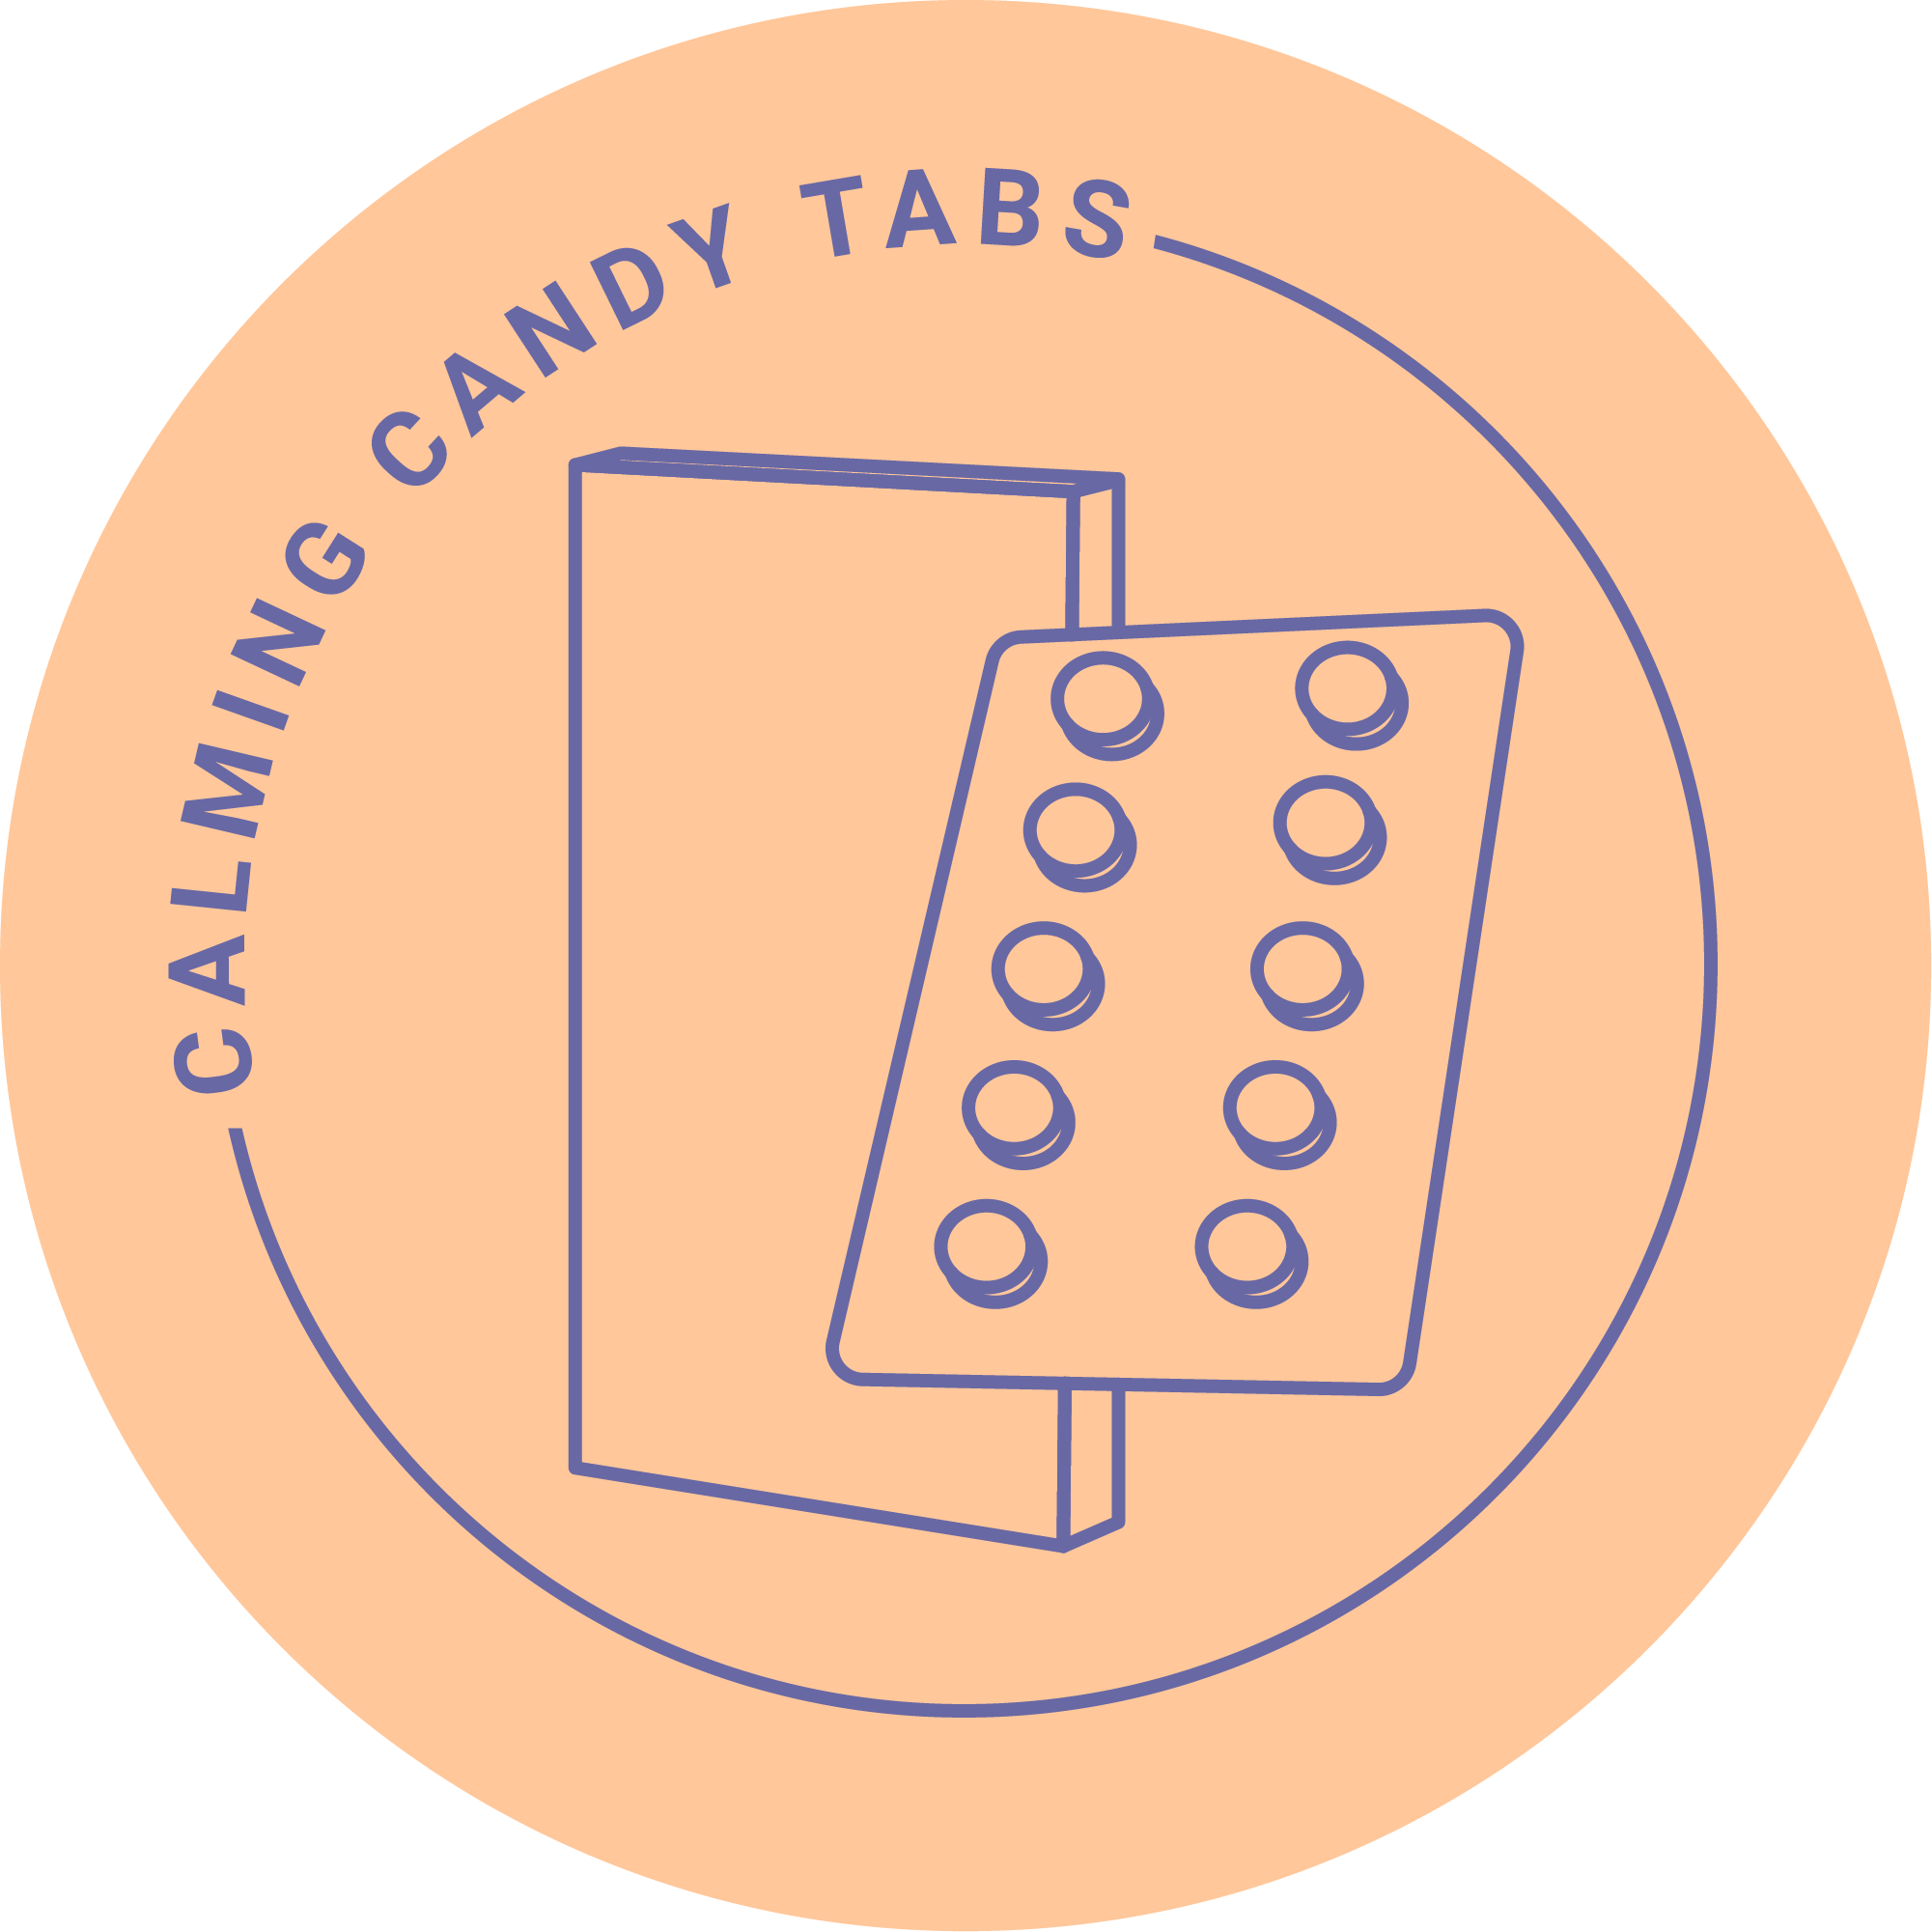 Candy Tabs